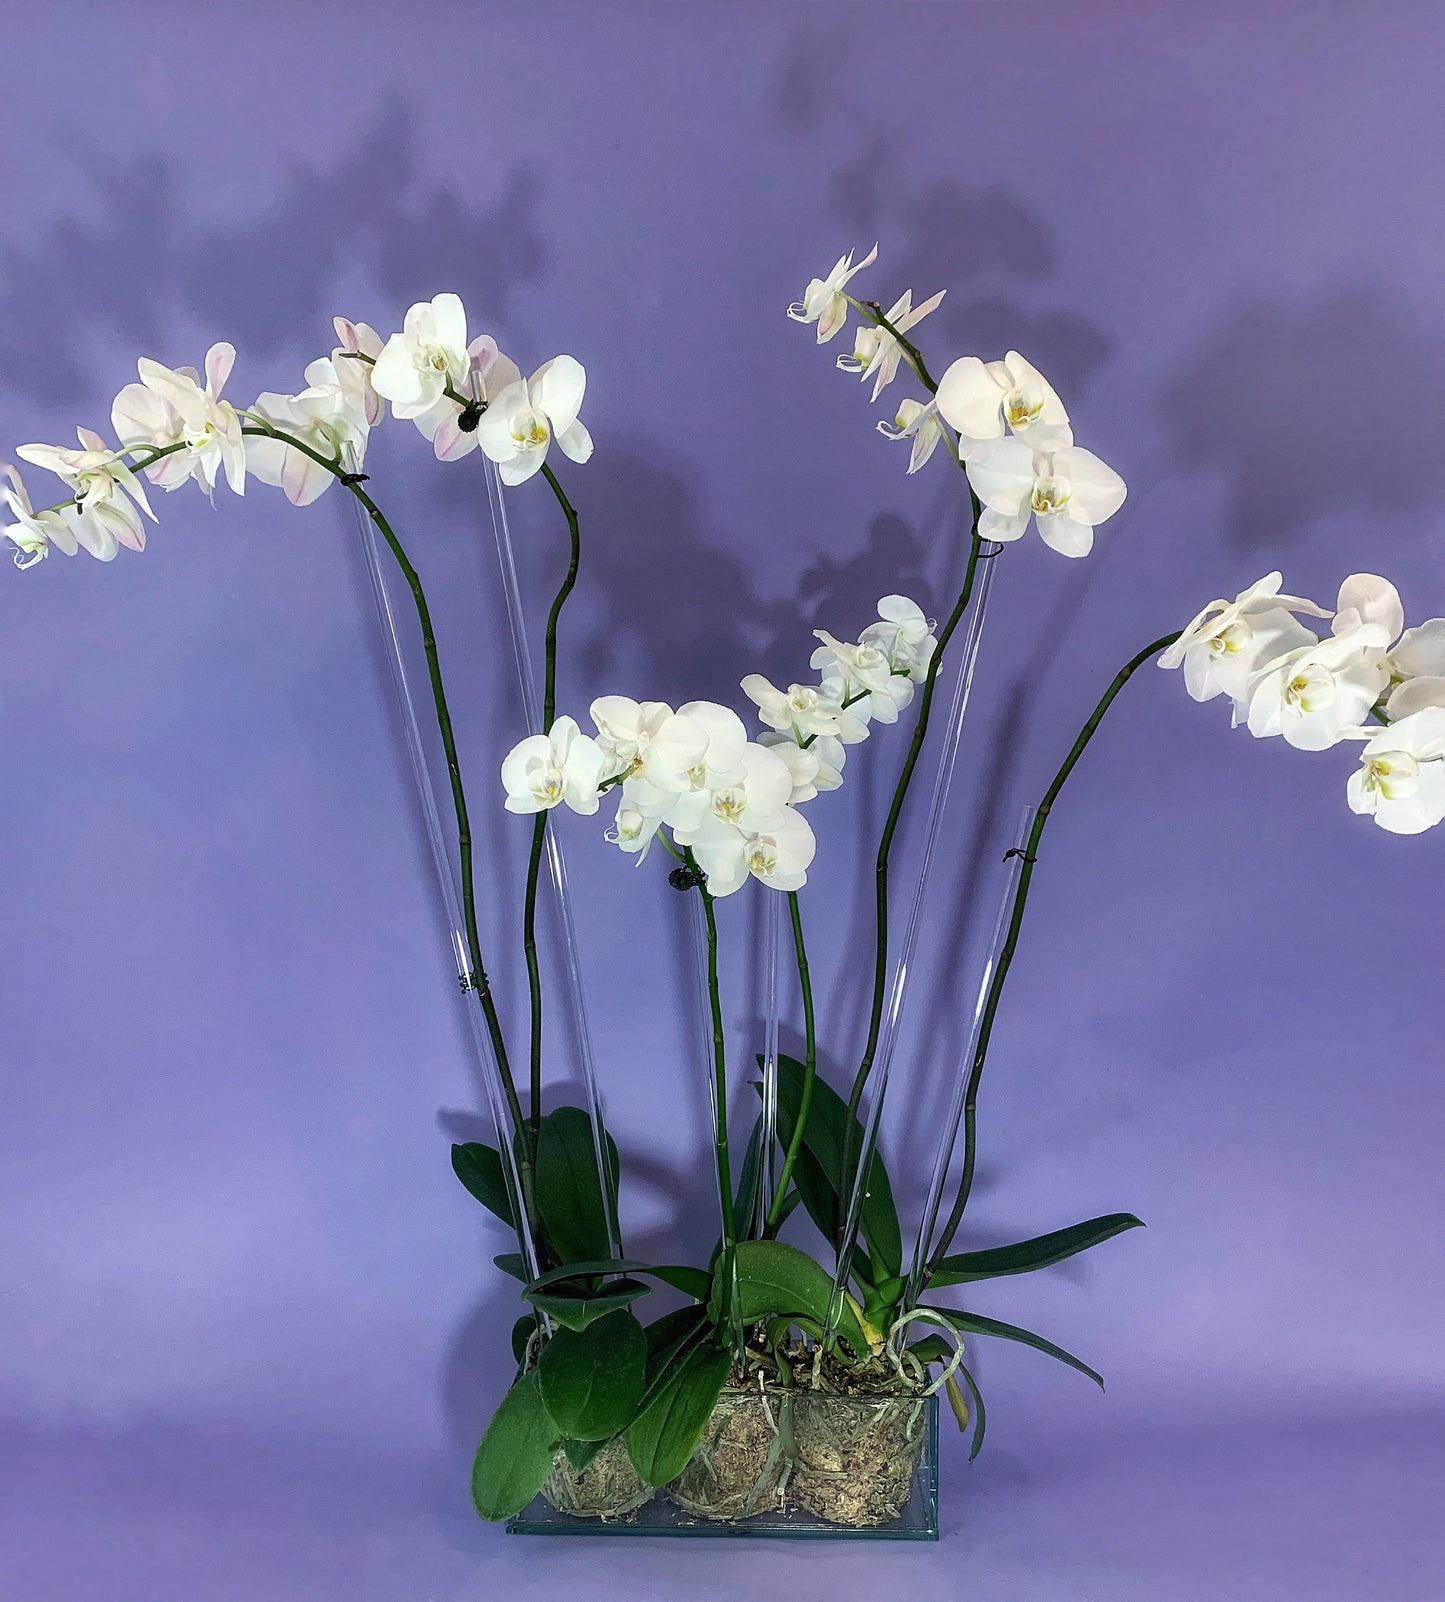 Three white orchid plants in an elegant sea glass container.